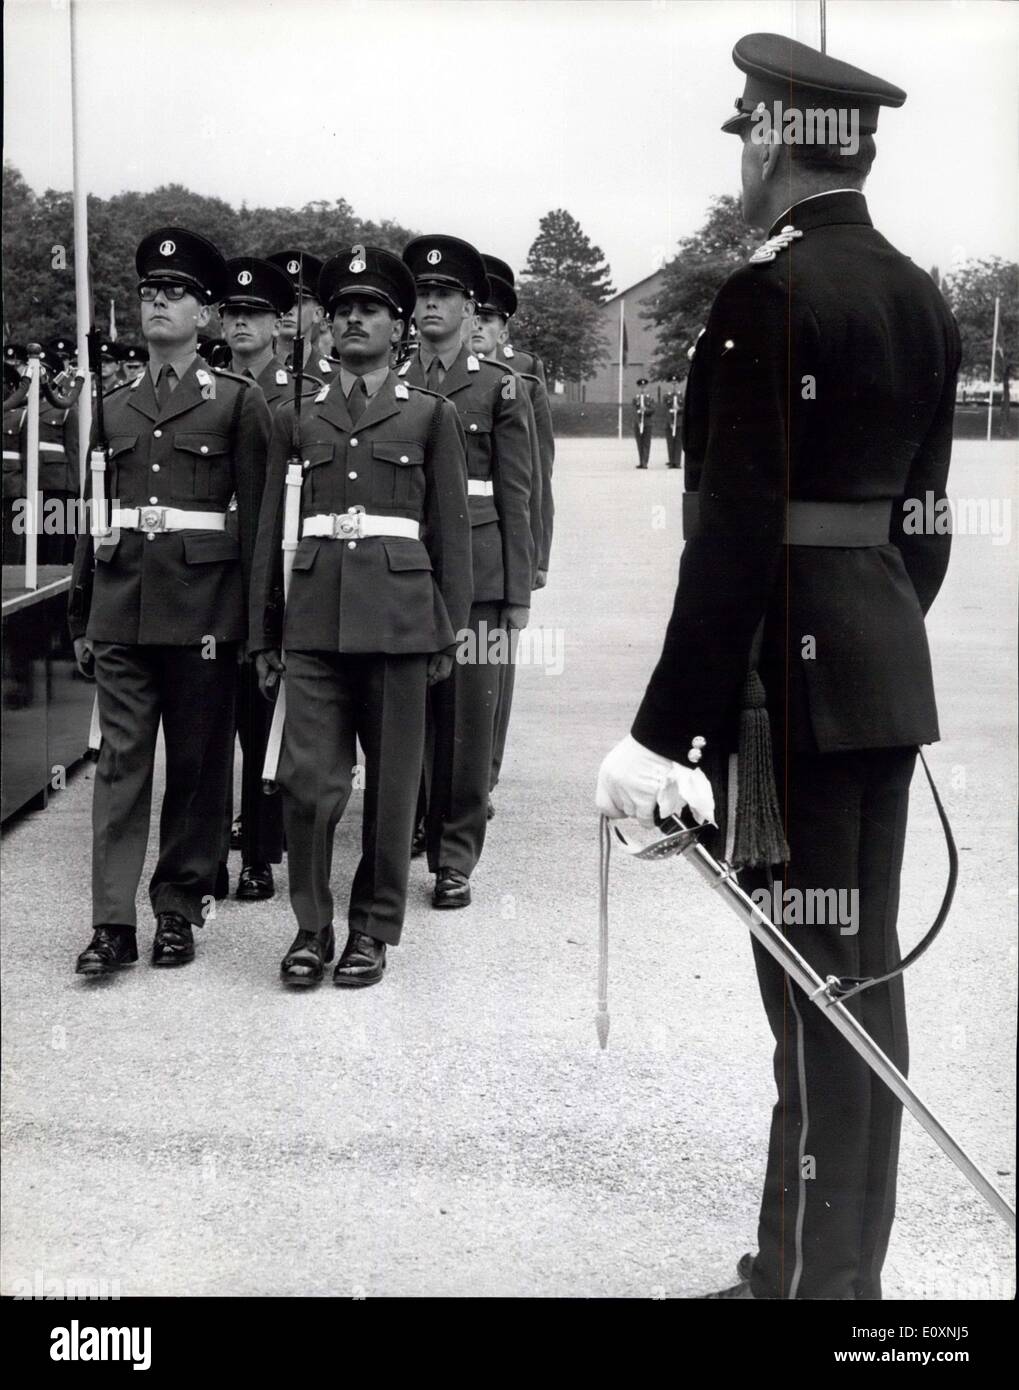 Jun. 09, 1967 - Commissioning Parade At Mons Officer Cadet School: Lieut. Gen. Sir David Peel Yates, General Officer Commanding-in-chief Eastern Command, was the Inspecting Officer at today's Commissioning Parade at Mons Officer Cadet School, Aldershot. Photo Shows Officer Cadet Prince Saad Turkey, a relative of King Faisal of Saudi Arabia in the front rank, on right, on the way to the Parade today. Stock Photo